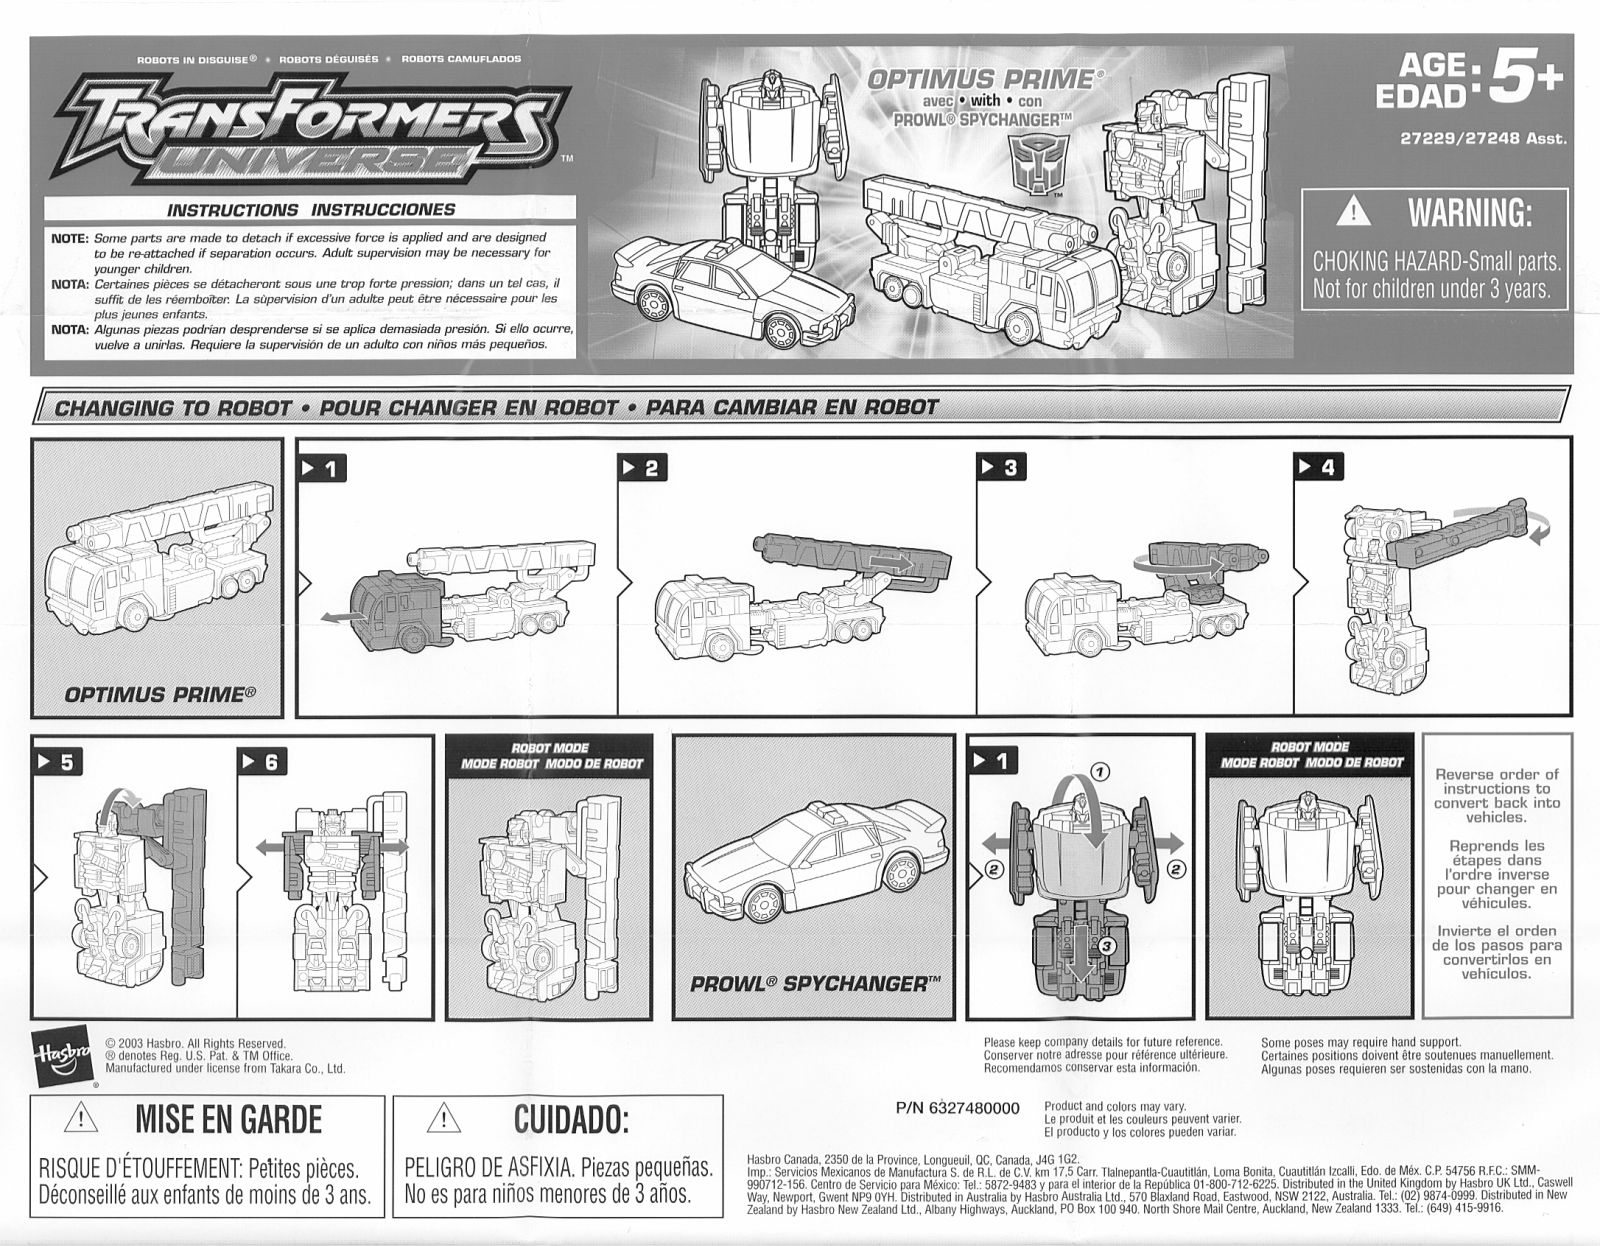 HASBRO Transformers Optimus Prime with Prowl Spychanger User Manual